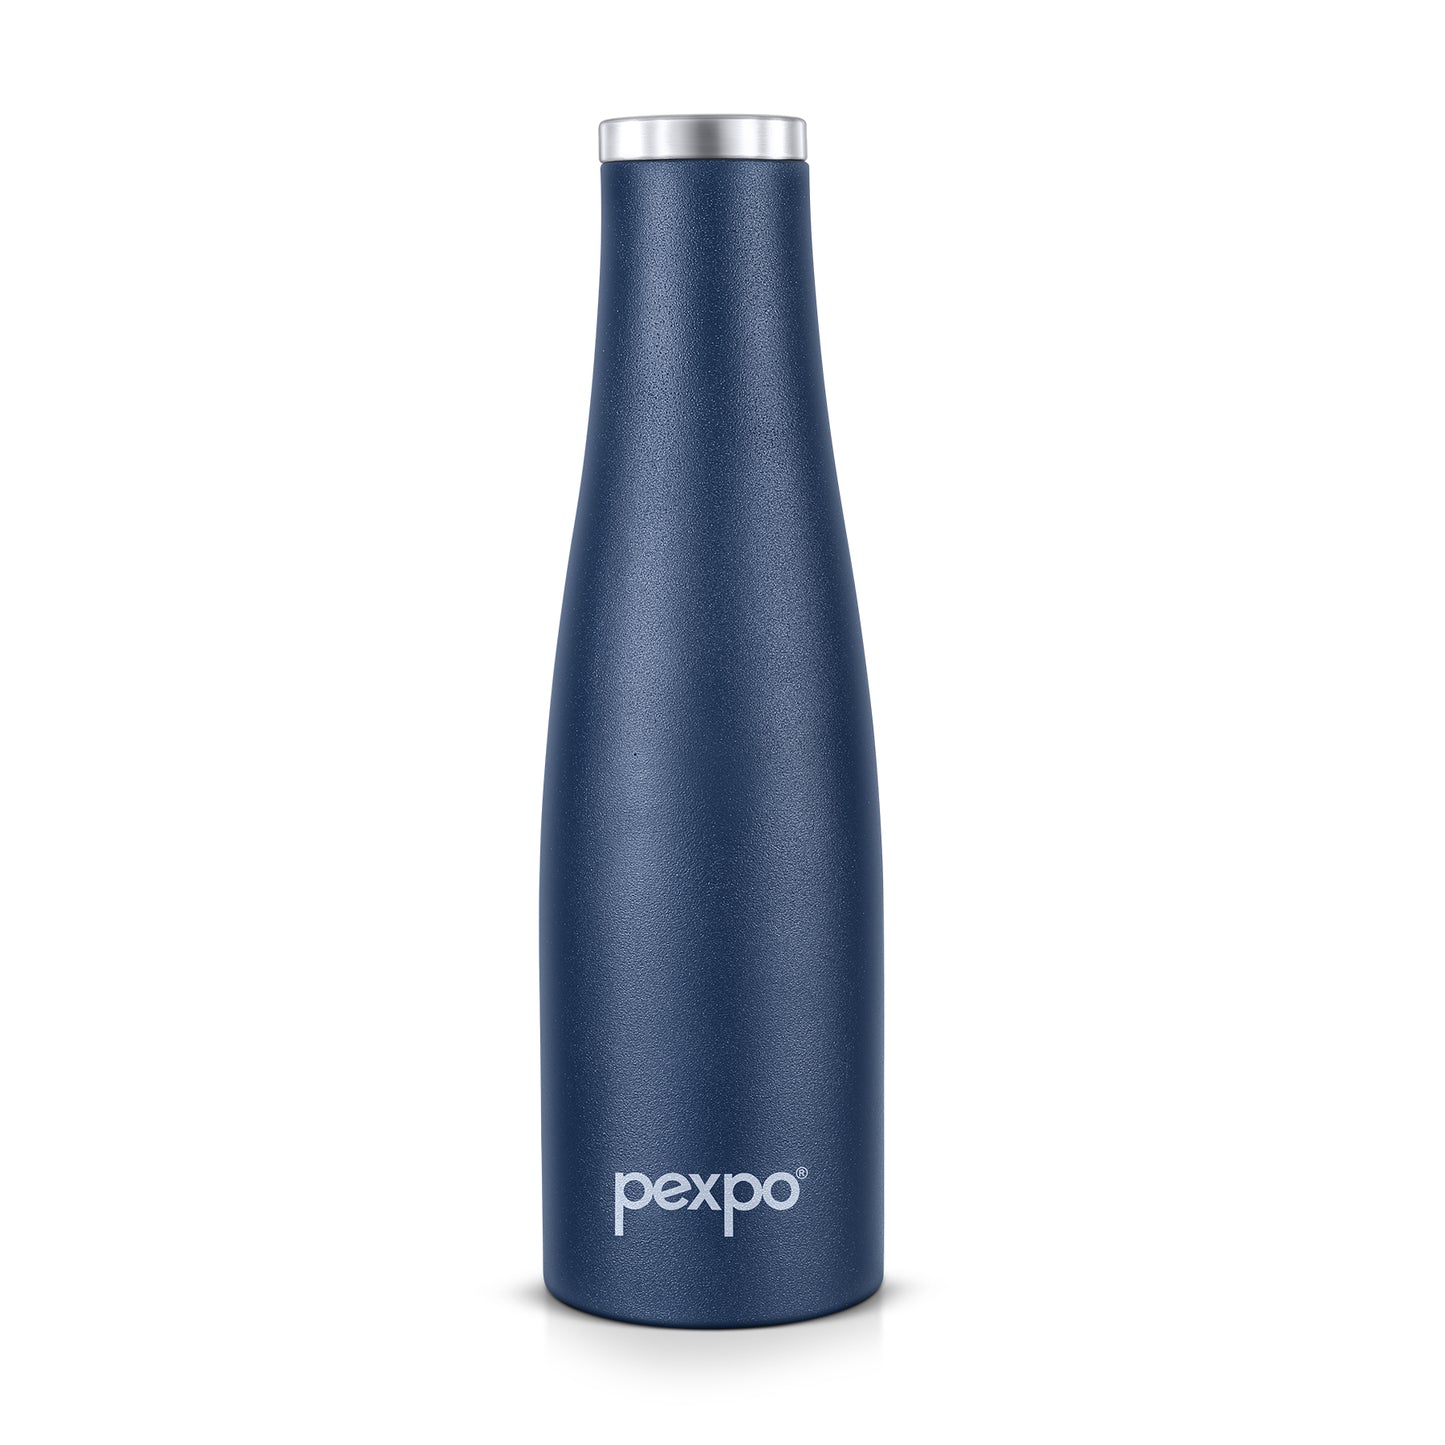 Pexpo Mexico- Stainless Steel Hot and Cold Vacuum Insulated Flask | Lightweight & Keeps Drinks Hot/Cold for 24+ Hours